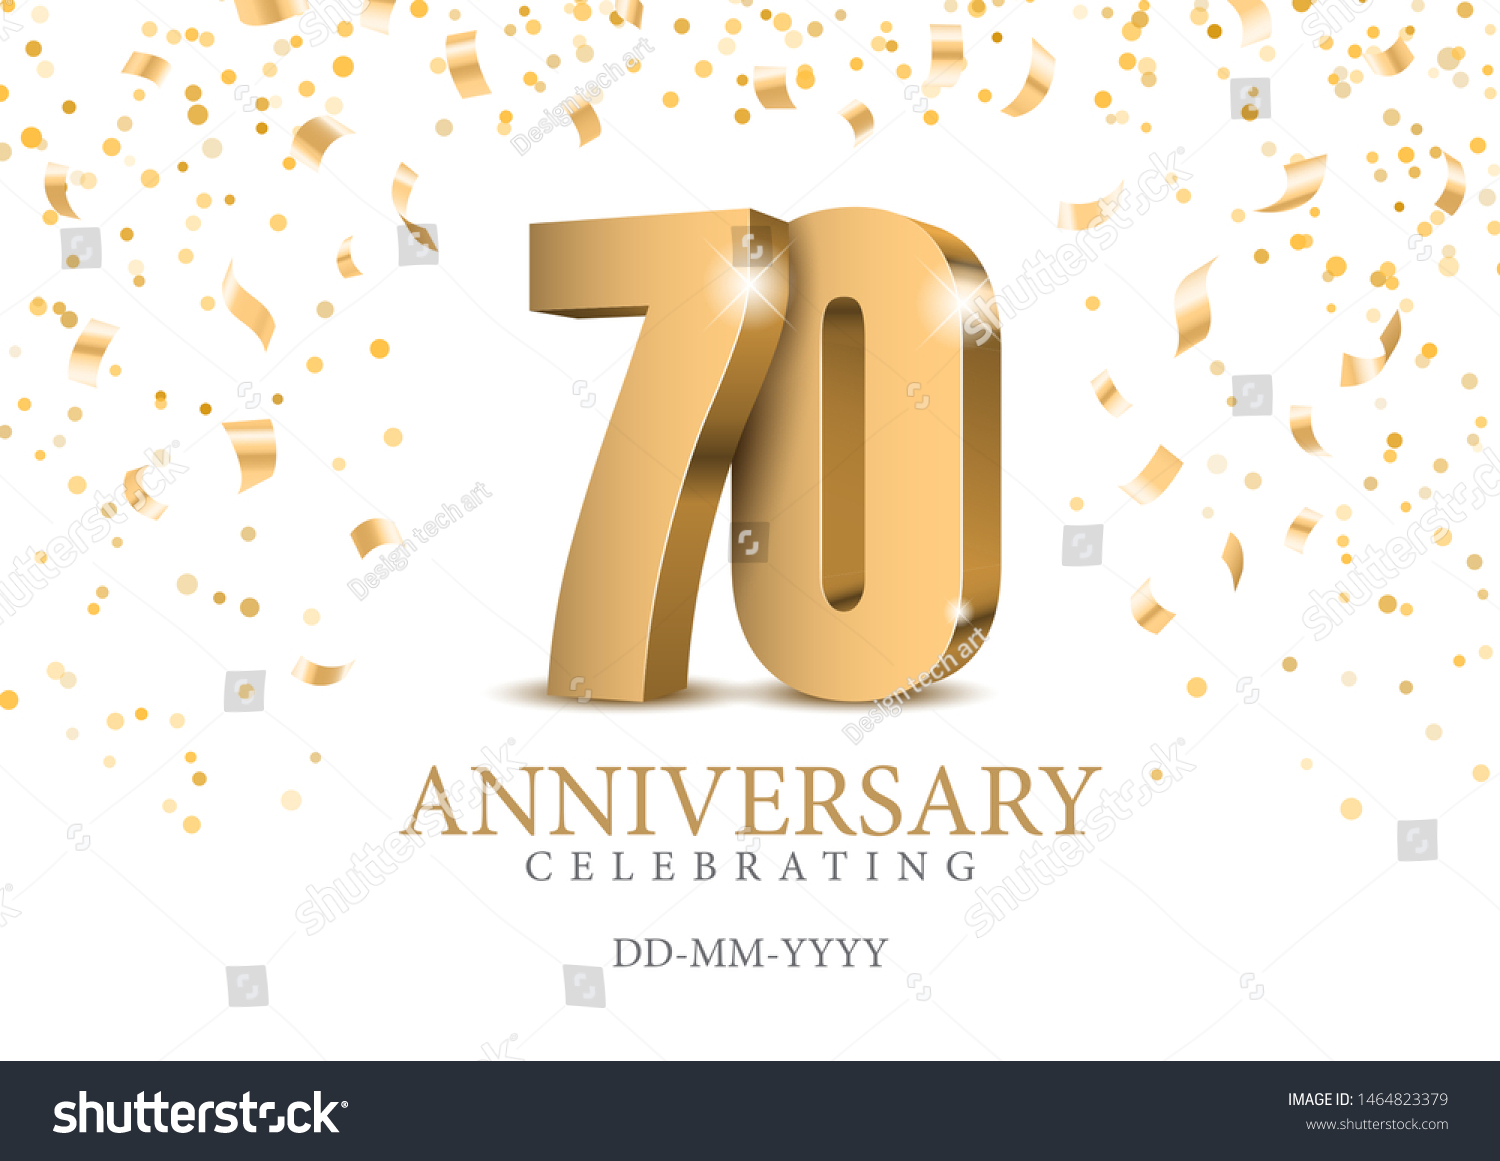 SVG of Anniversary 70. gold 3d numbers. Poster template for Celebrating 70th anniversary event party. Vector illustration svg